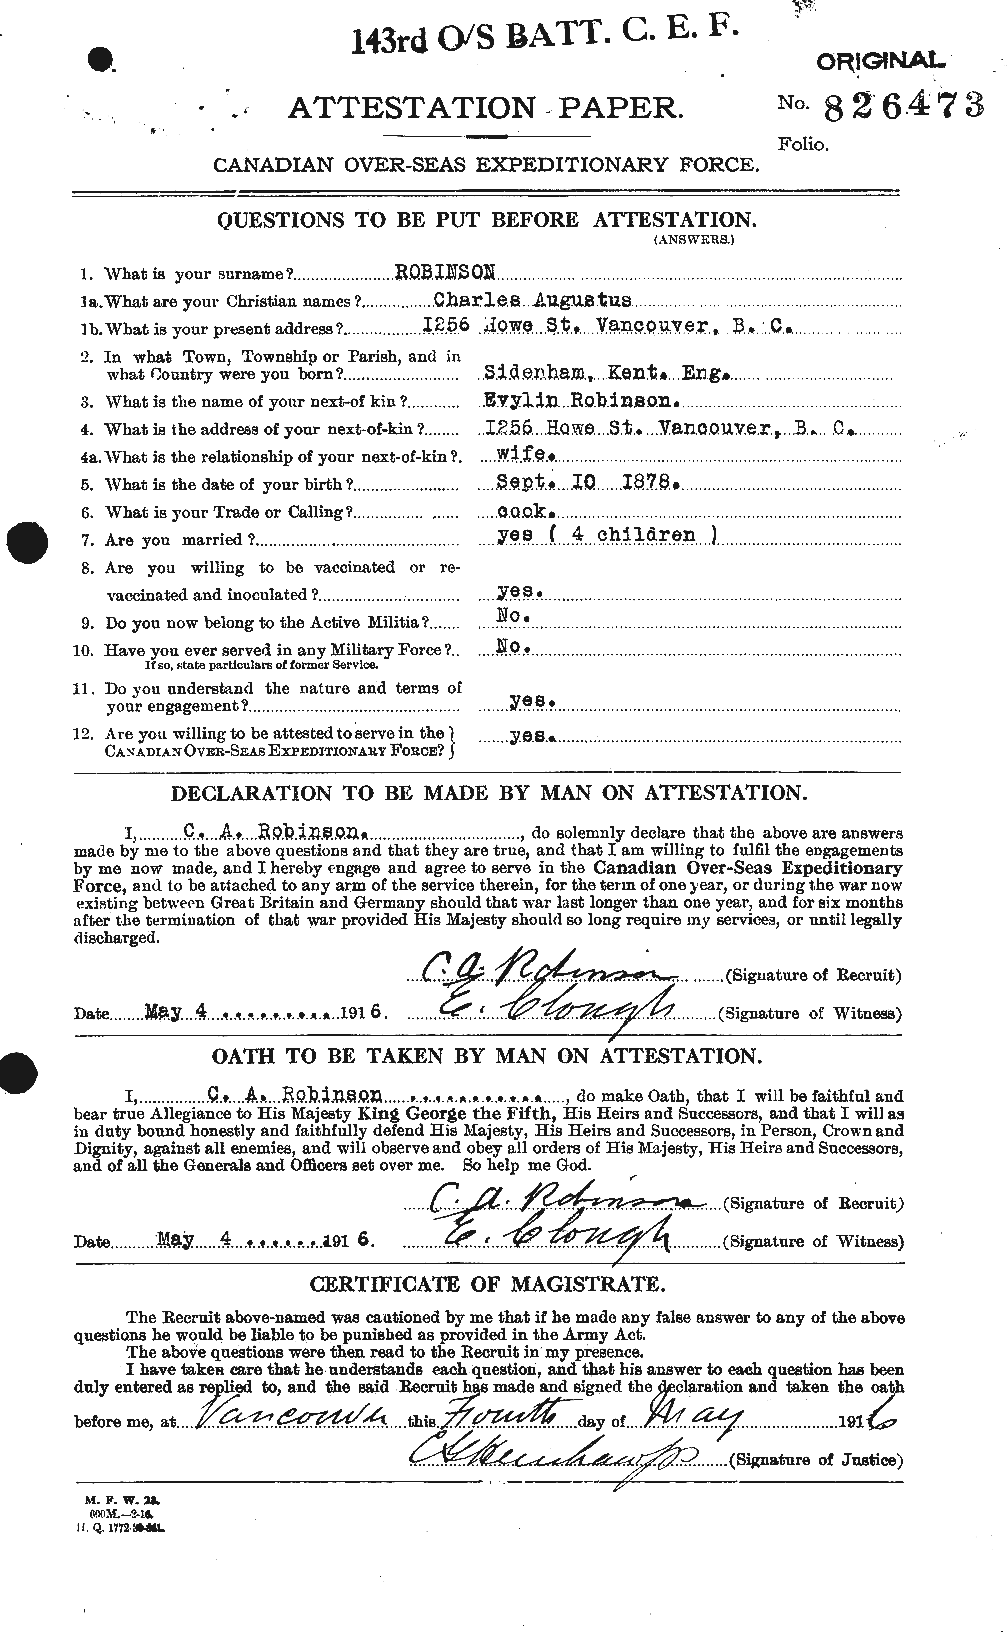 Personnel Records of the First World War - CEF 607059a